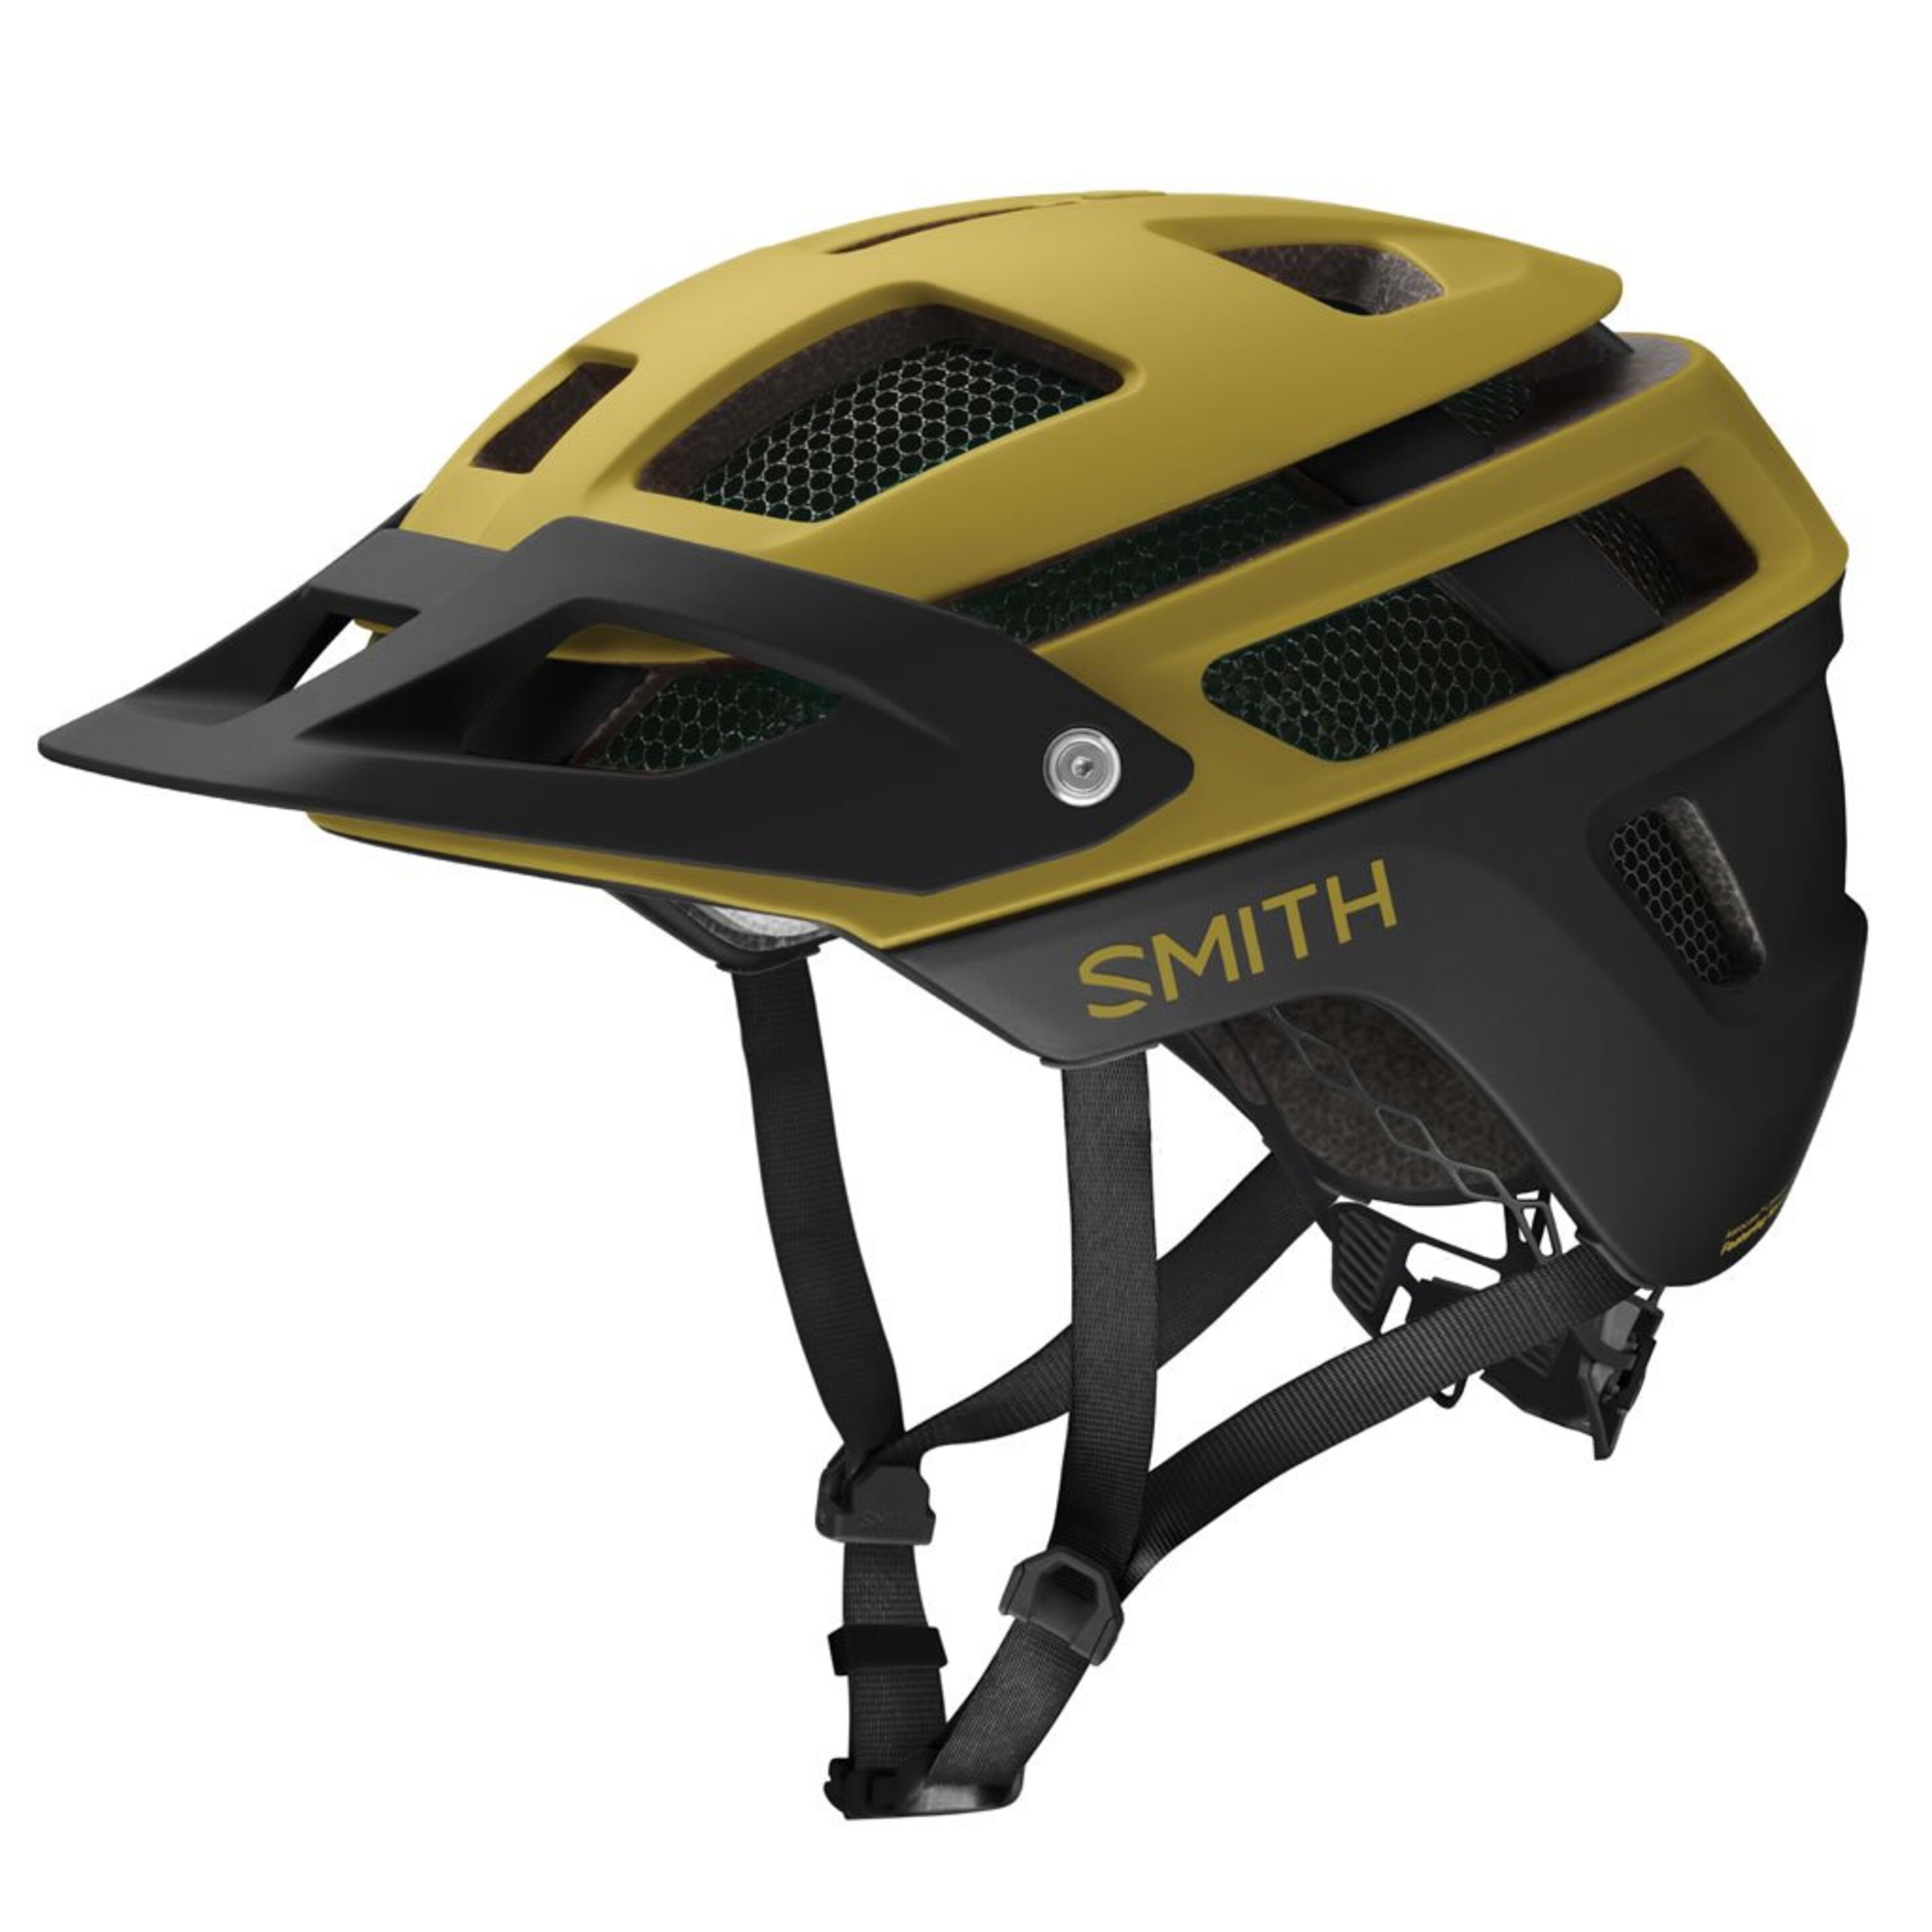 Casco Ciclismo Forefront 2mips Smith